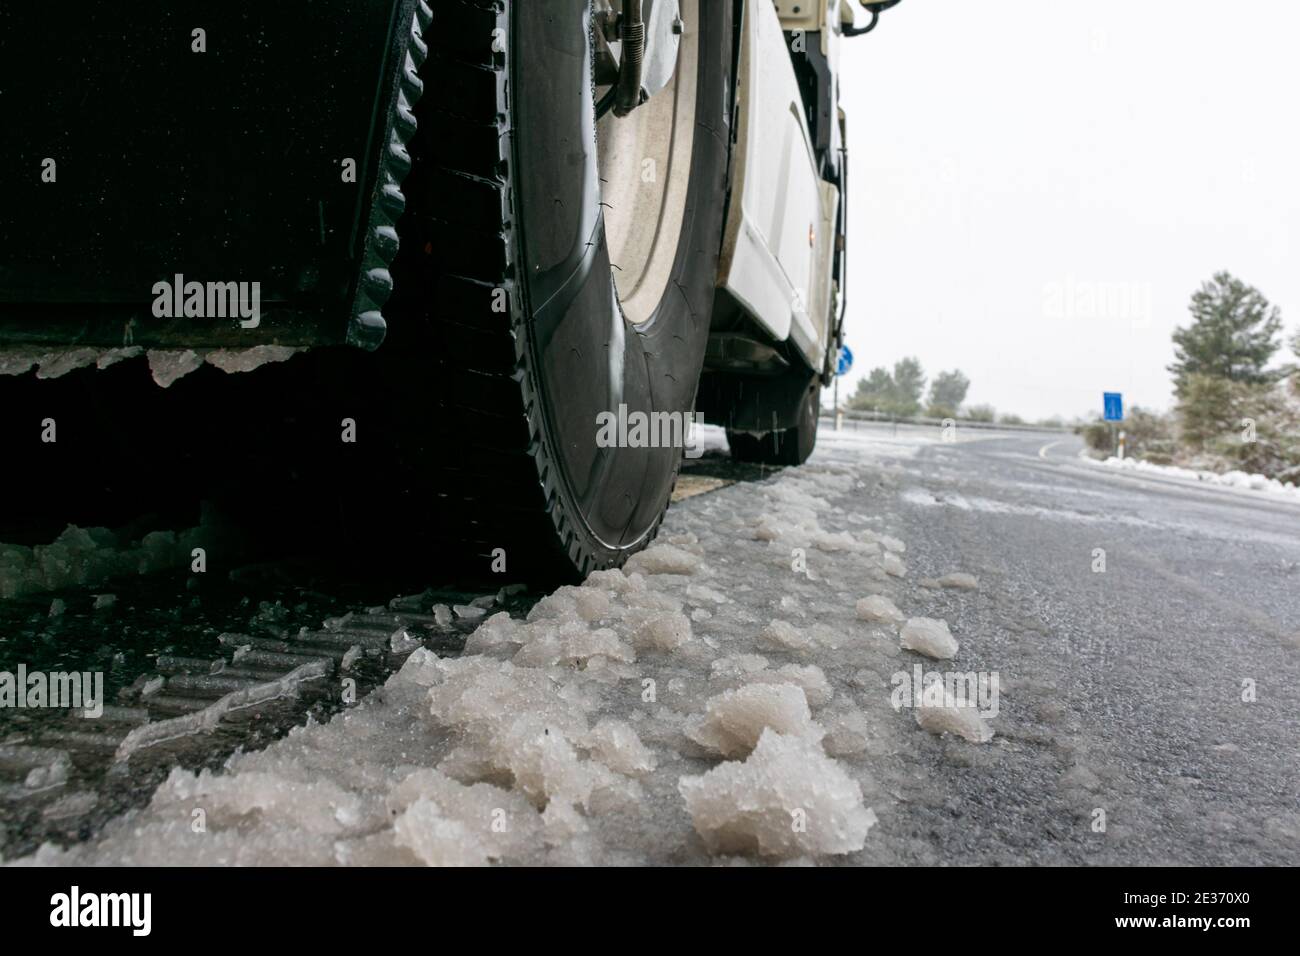 Ground level view of truck wheels on snow. Stock Photo